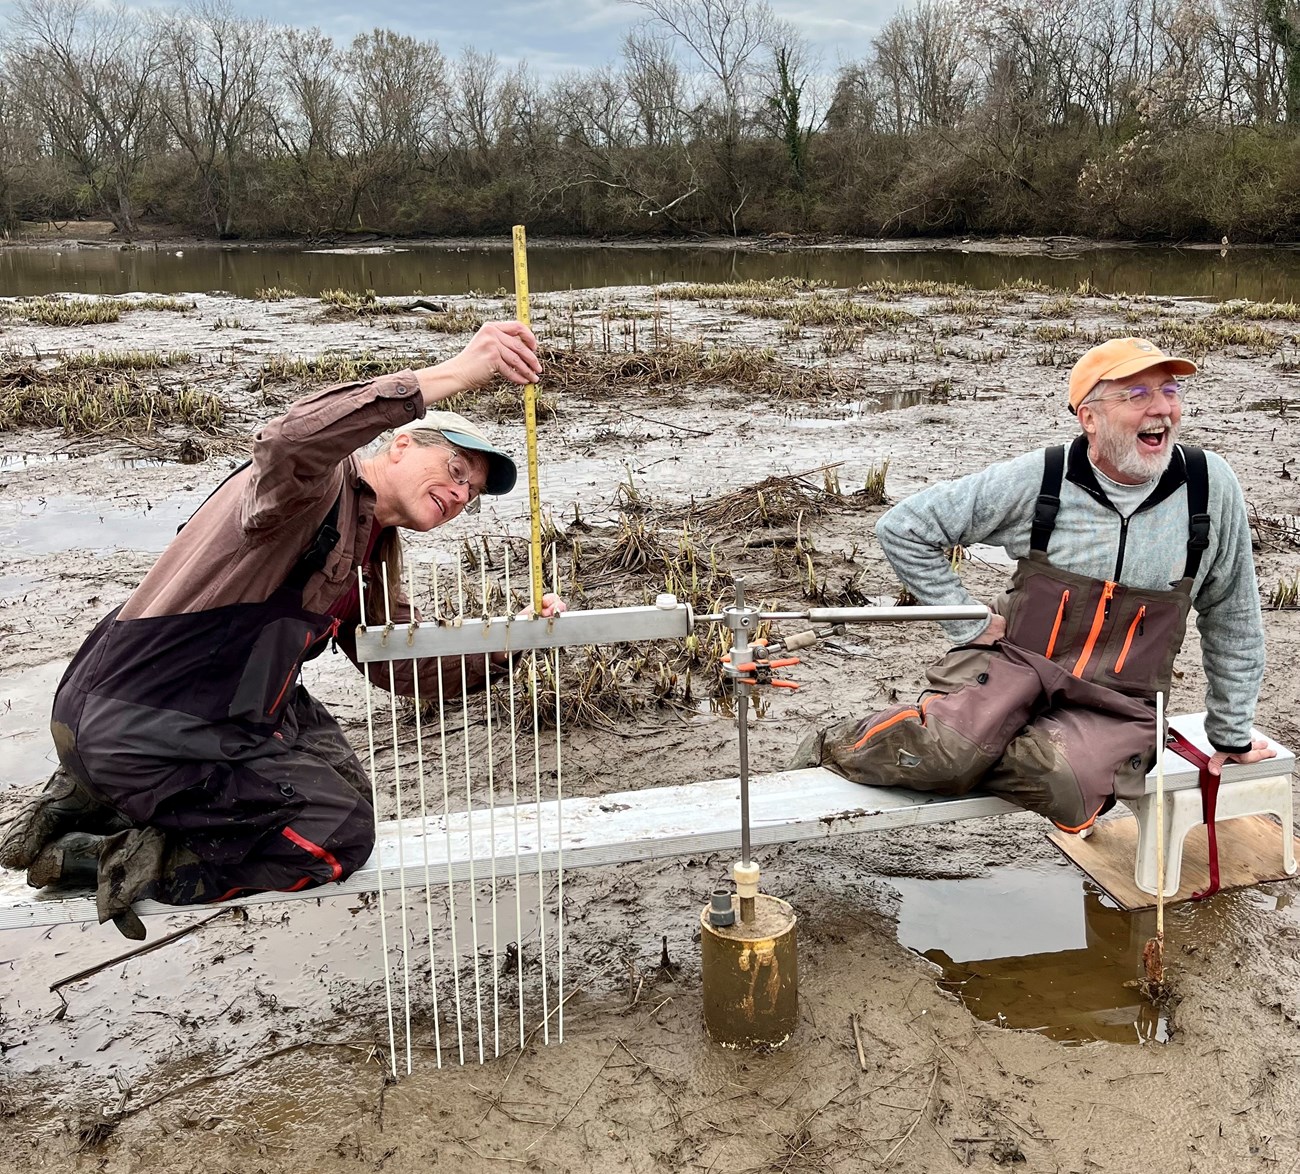 Two ecologists sit on a bench in the swamp, one measuring with SET, the other laughing toward the camera.